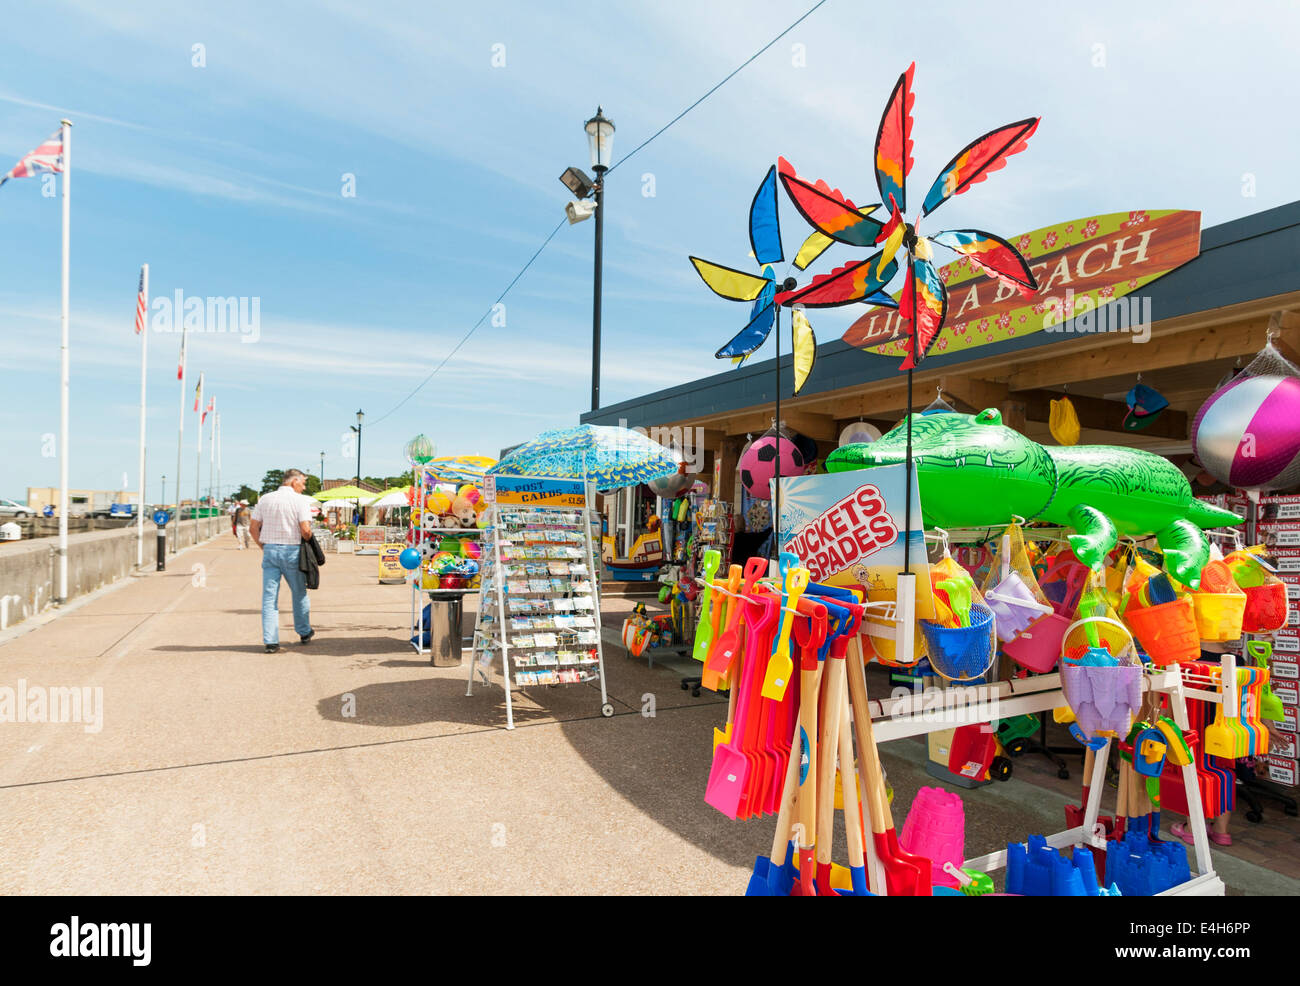 Summer seaside kiosk selling buckets and spades along with other beach related items on the promenade at Ryde isle of wight UK Stock Photo